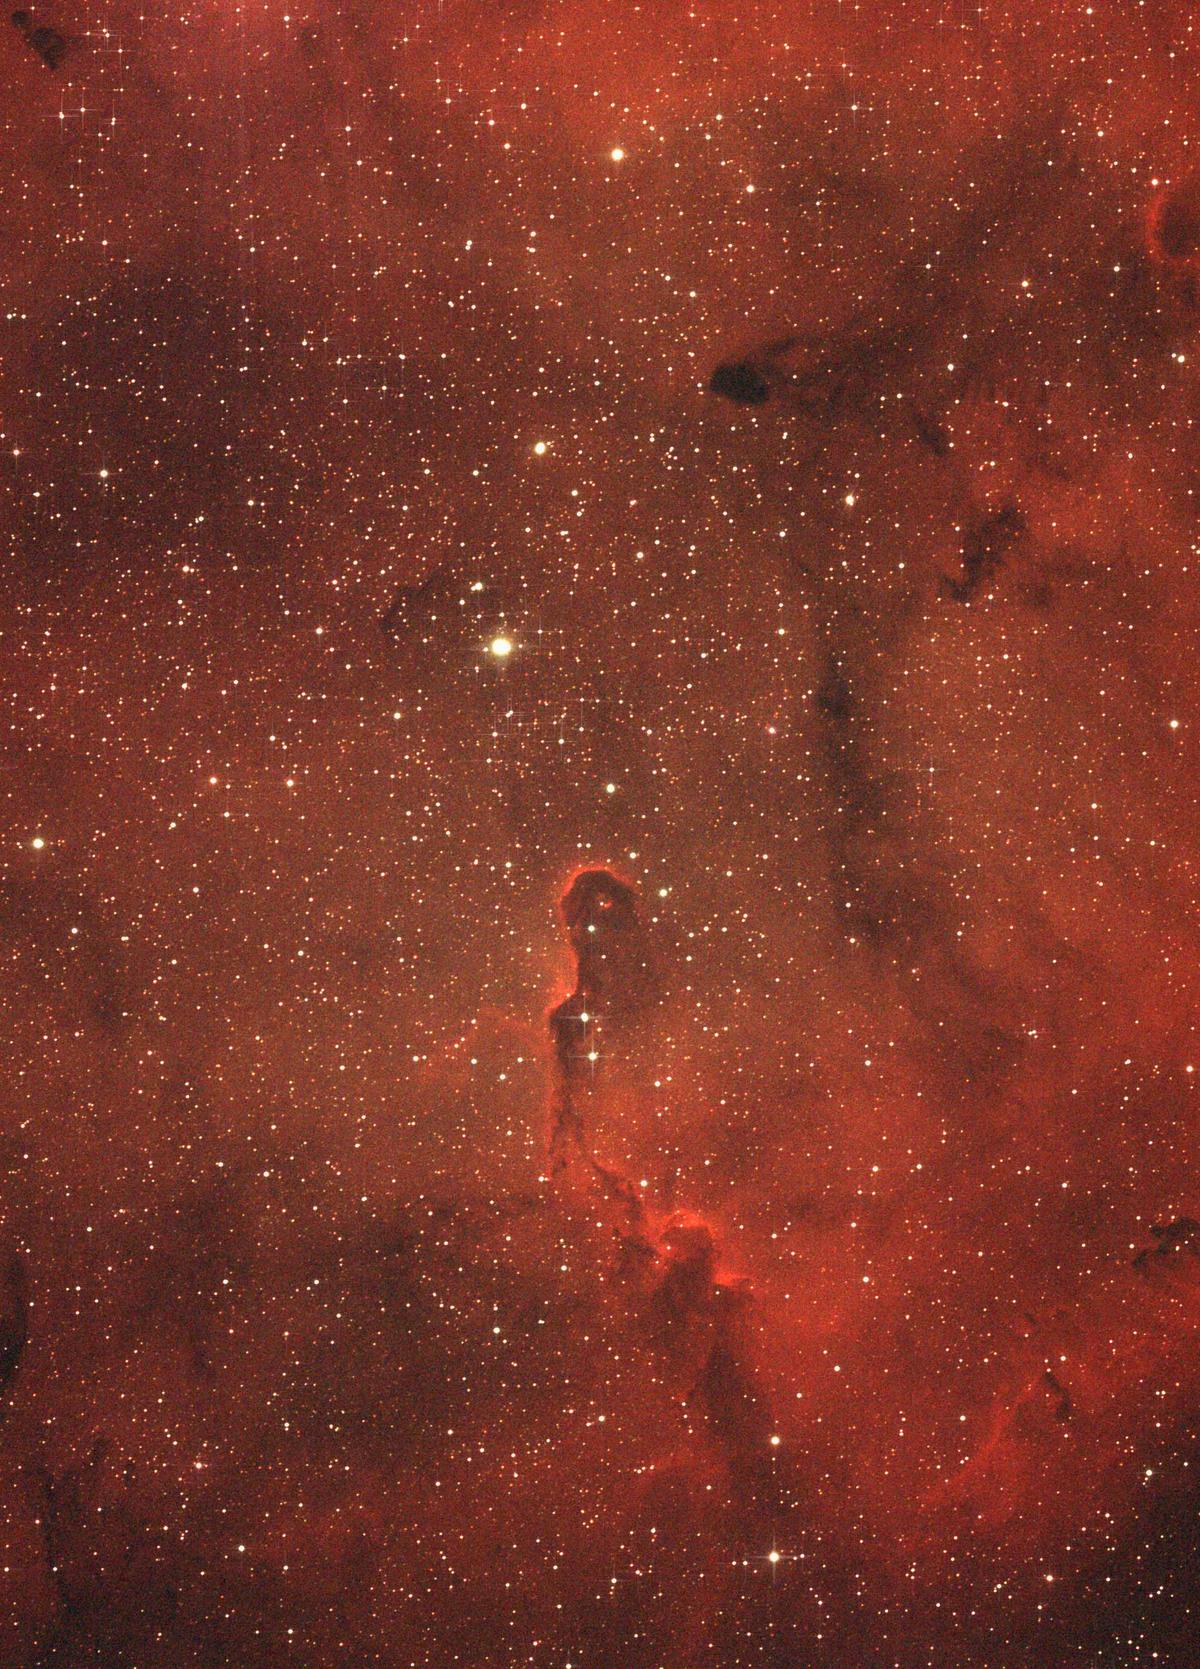 The Elephant's Trunk Nebula is a concentration of interstellar gas and dust within the much larger ionized gas region IC 1396, located in the constellation Cepheus about 2,400 light-years away from Earth. (SWNS)